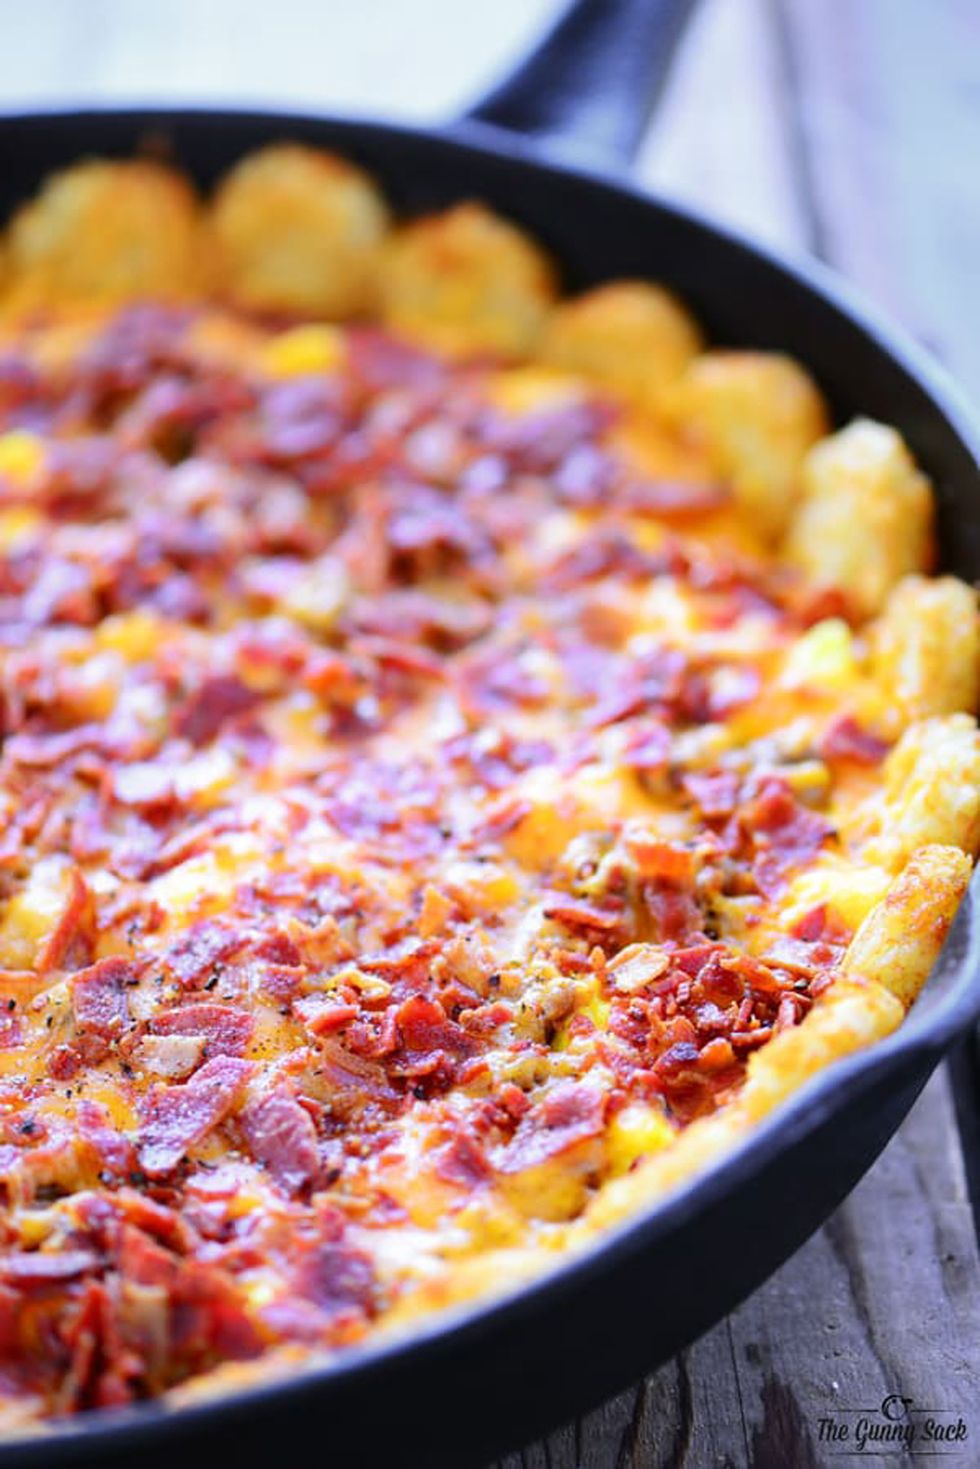 https://hips.hearstapps.com/hmg-prod/images/dutch-oven-camping-recipes-tater-tots-1524755587.jpg?crop=1xw:1xh;center,top&resize=980:*